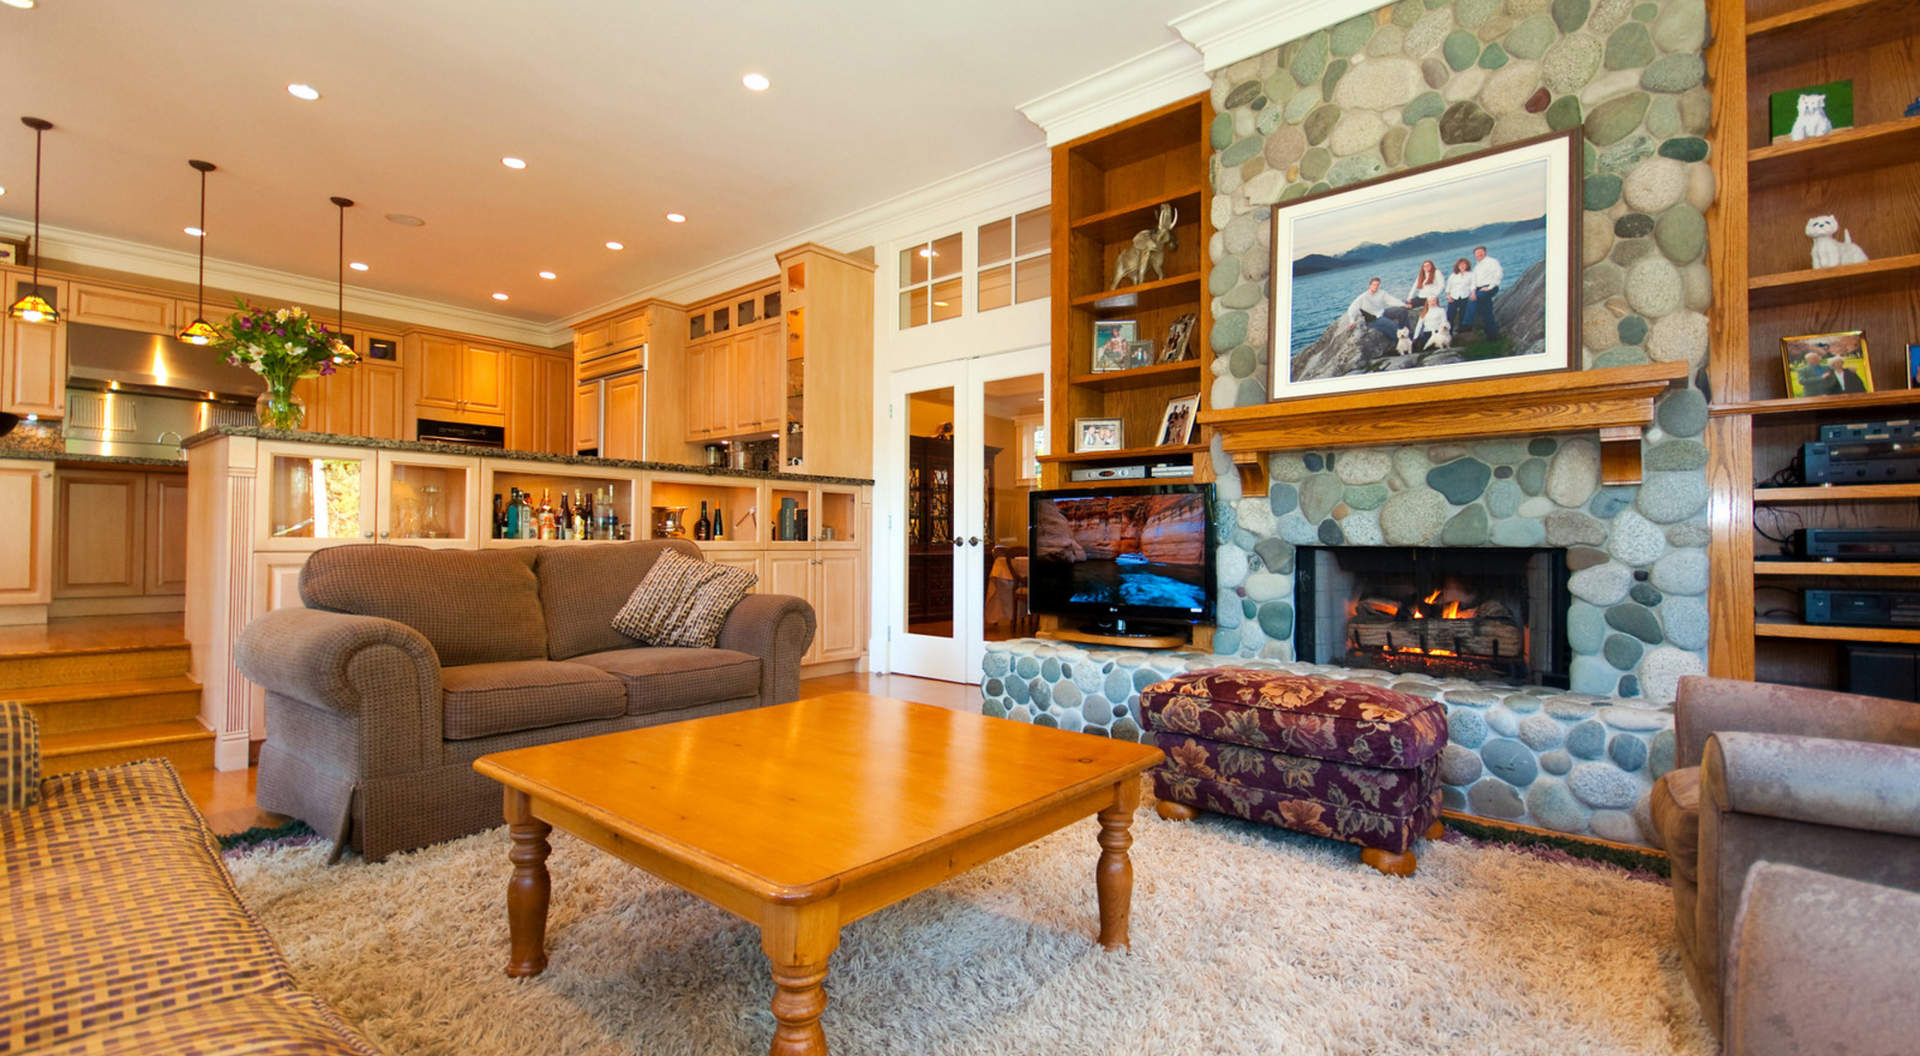 Family Room with Fireplace and Media Center